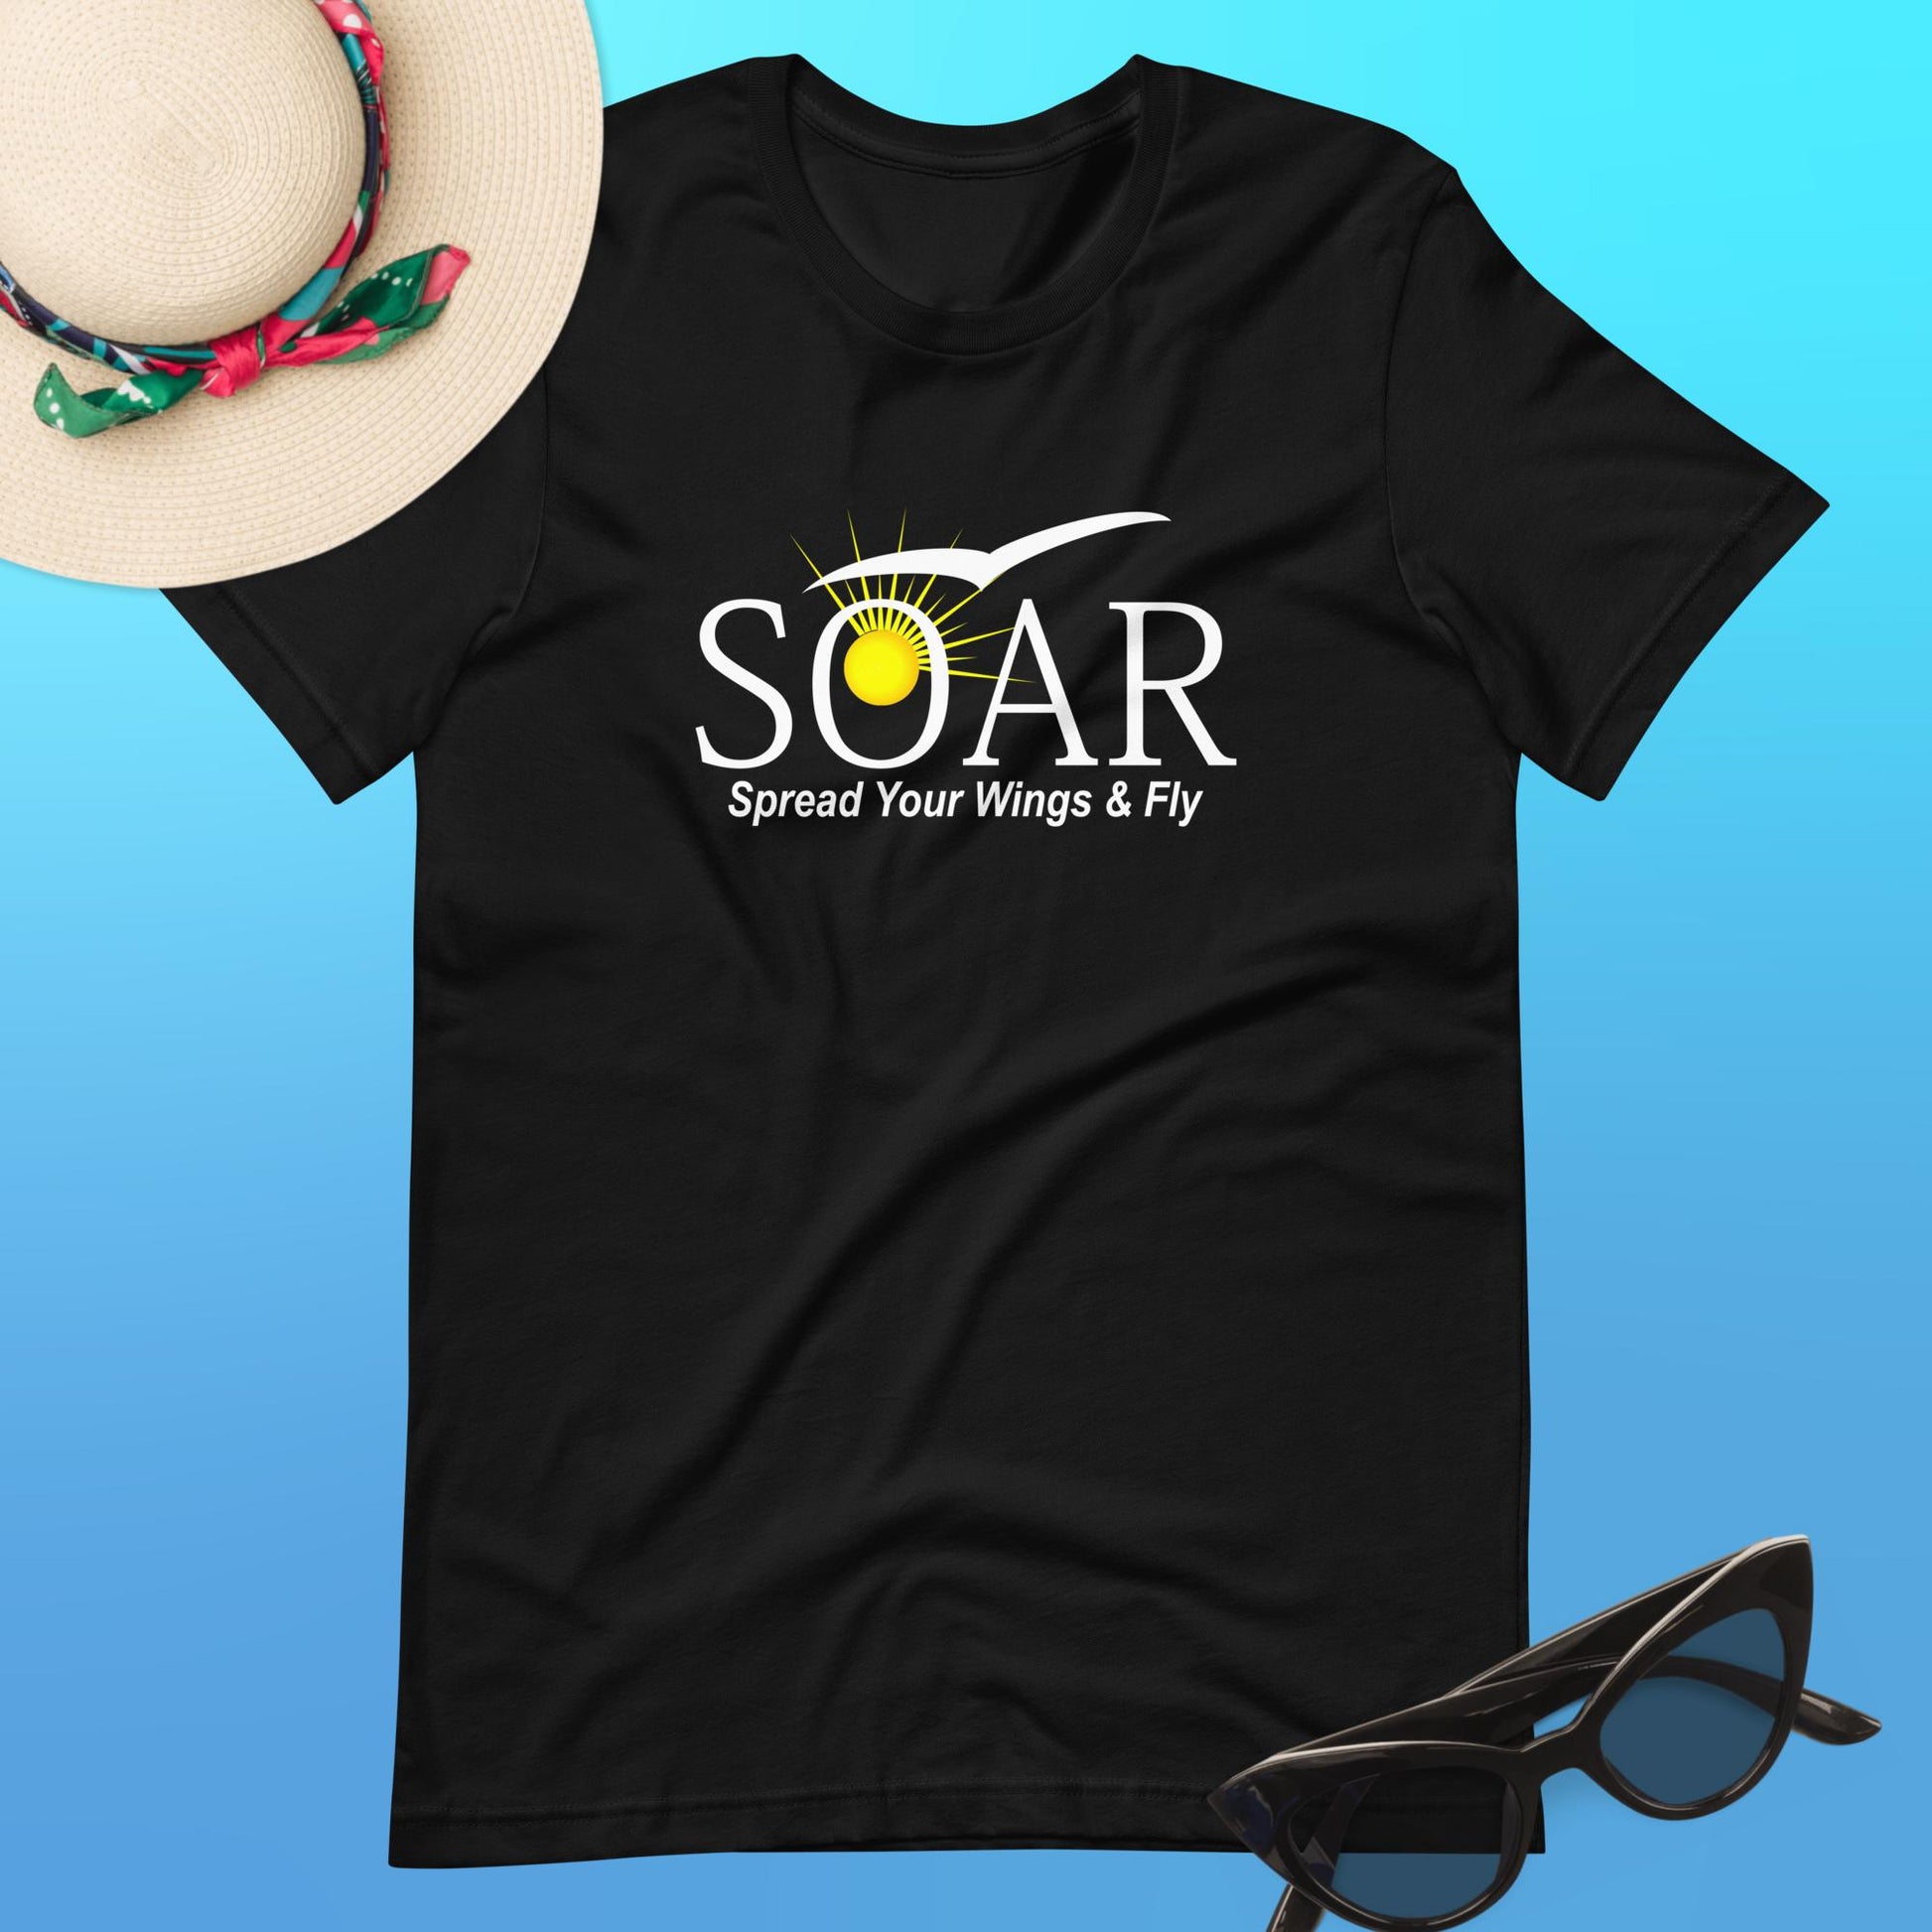 "Classic Black T-Shirt: 'SOAR' Design with Sun and Seagull Motif. 'Spread your wings & fly' - Available at PuraFashions.com. Flat-lay image showcasing the front design."